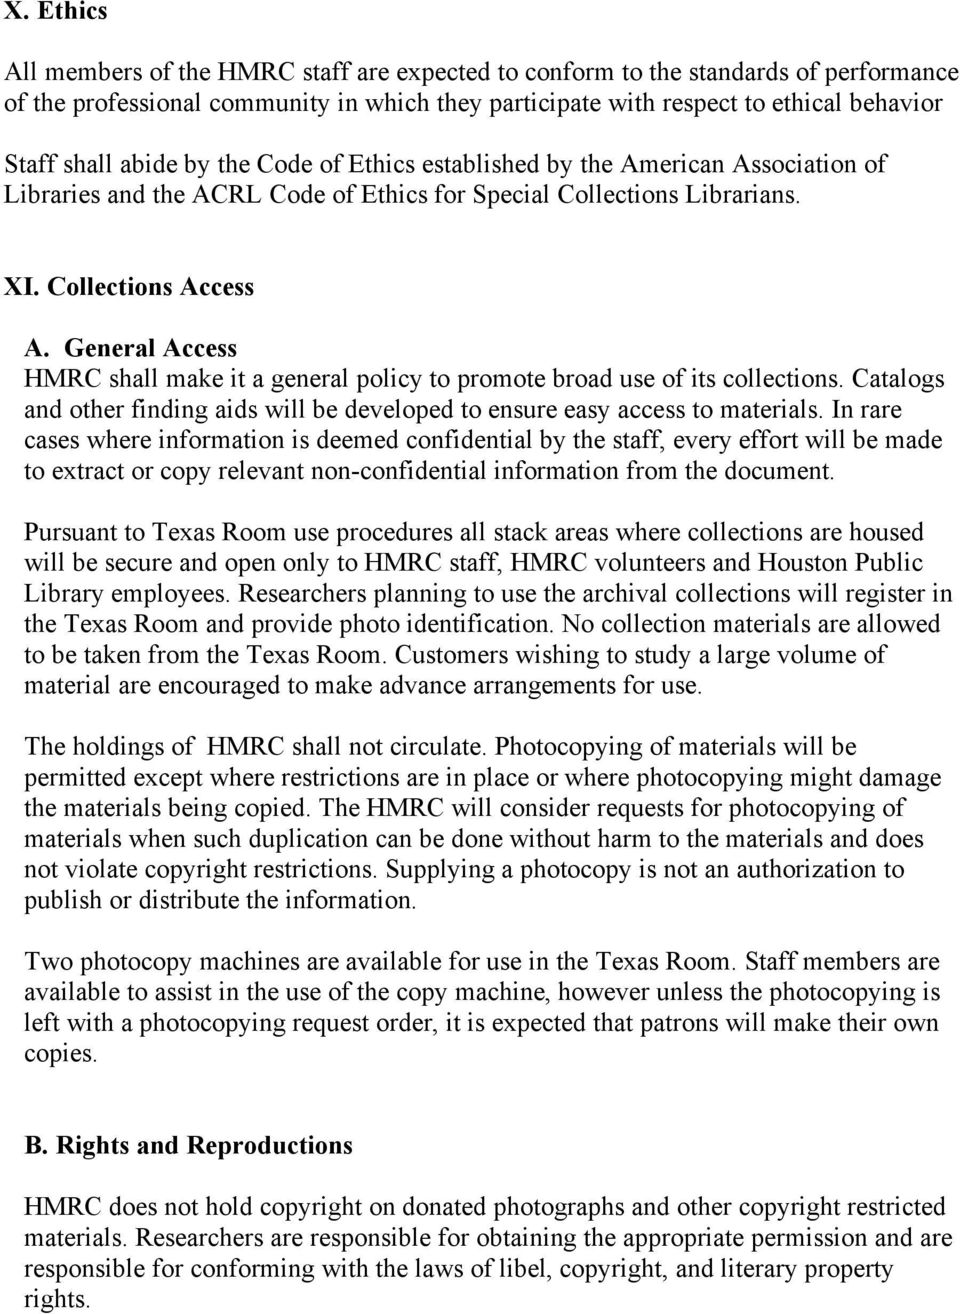 General Access HMRC shall make it a general policy to promote broad use of its collections. Catalogs and other finding aids will be developed to ensure easy access to materials.